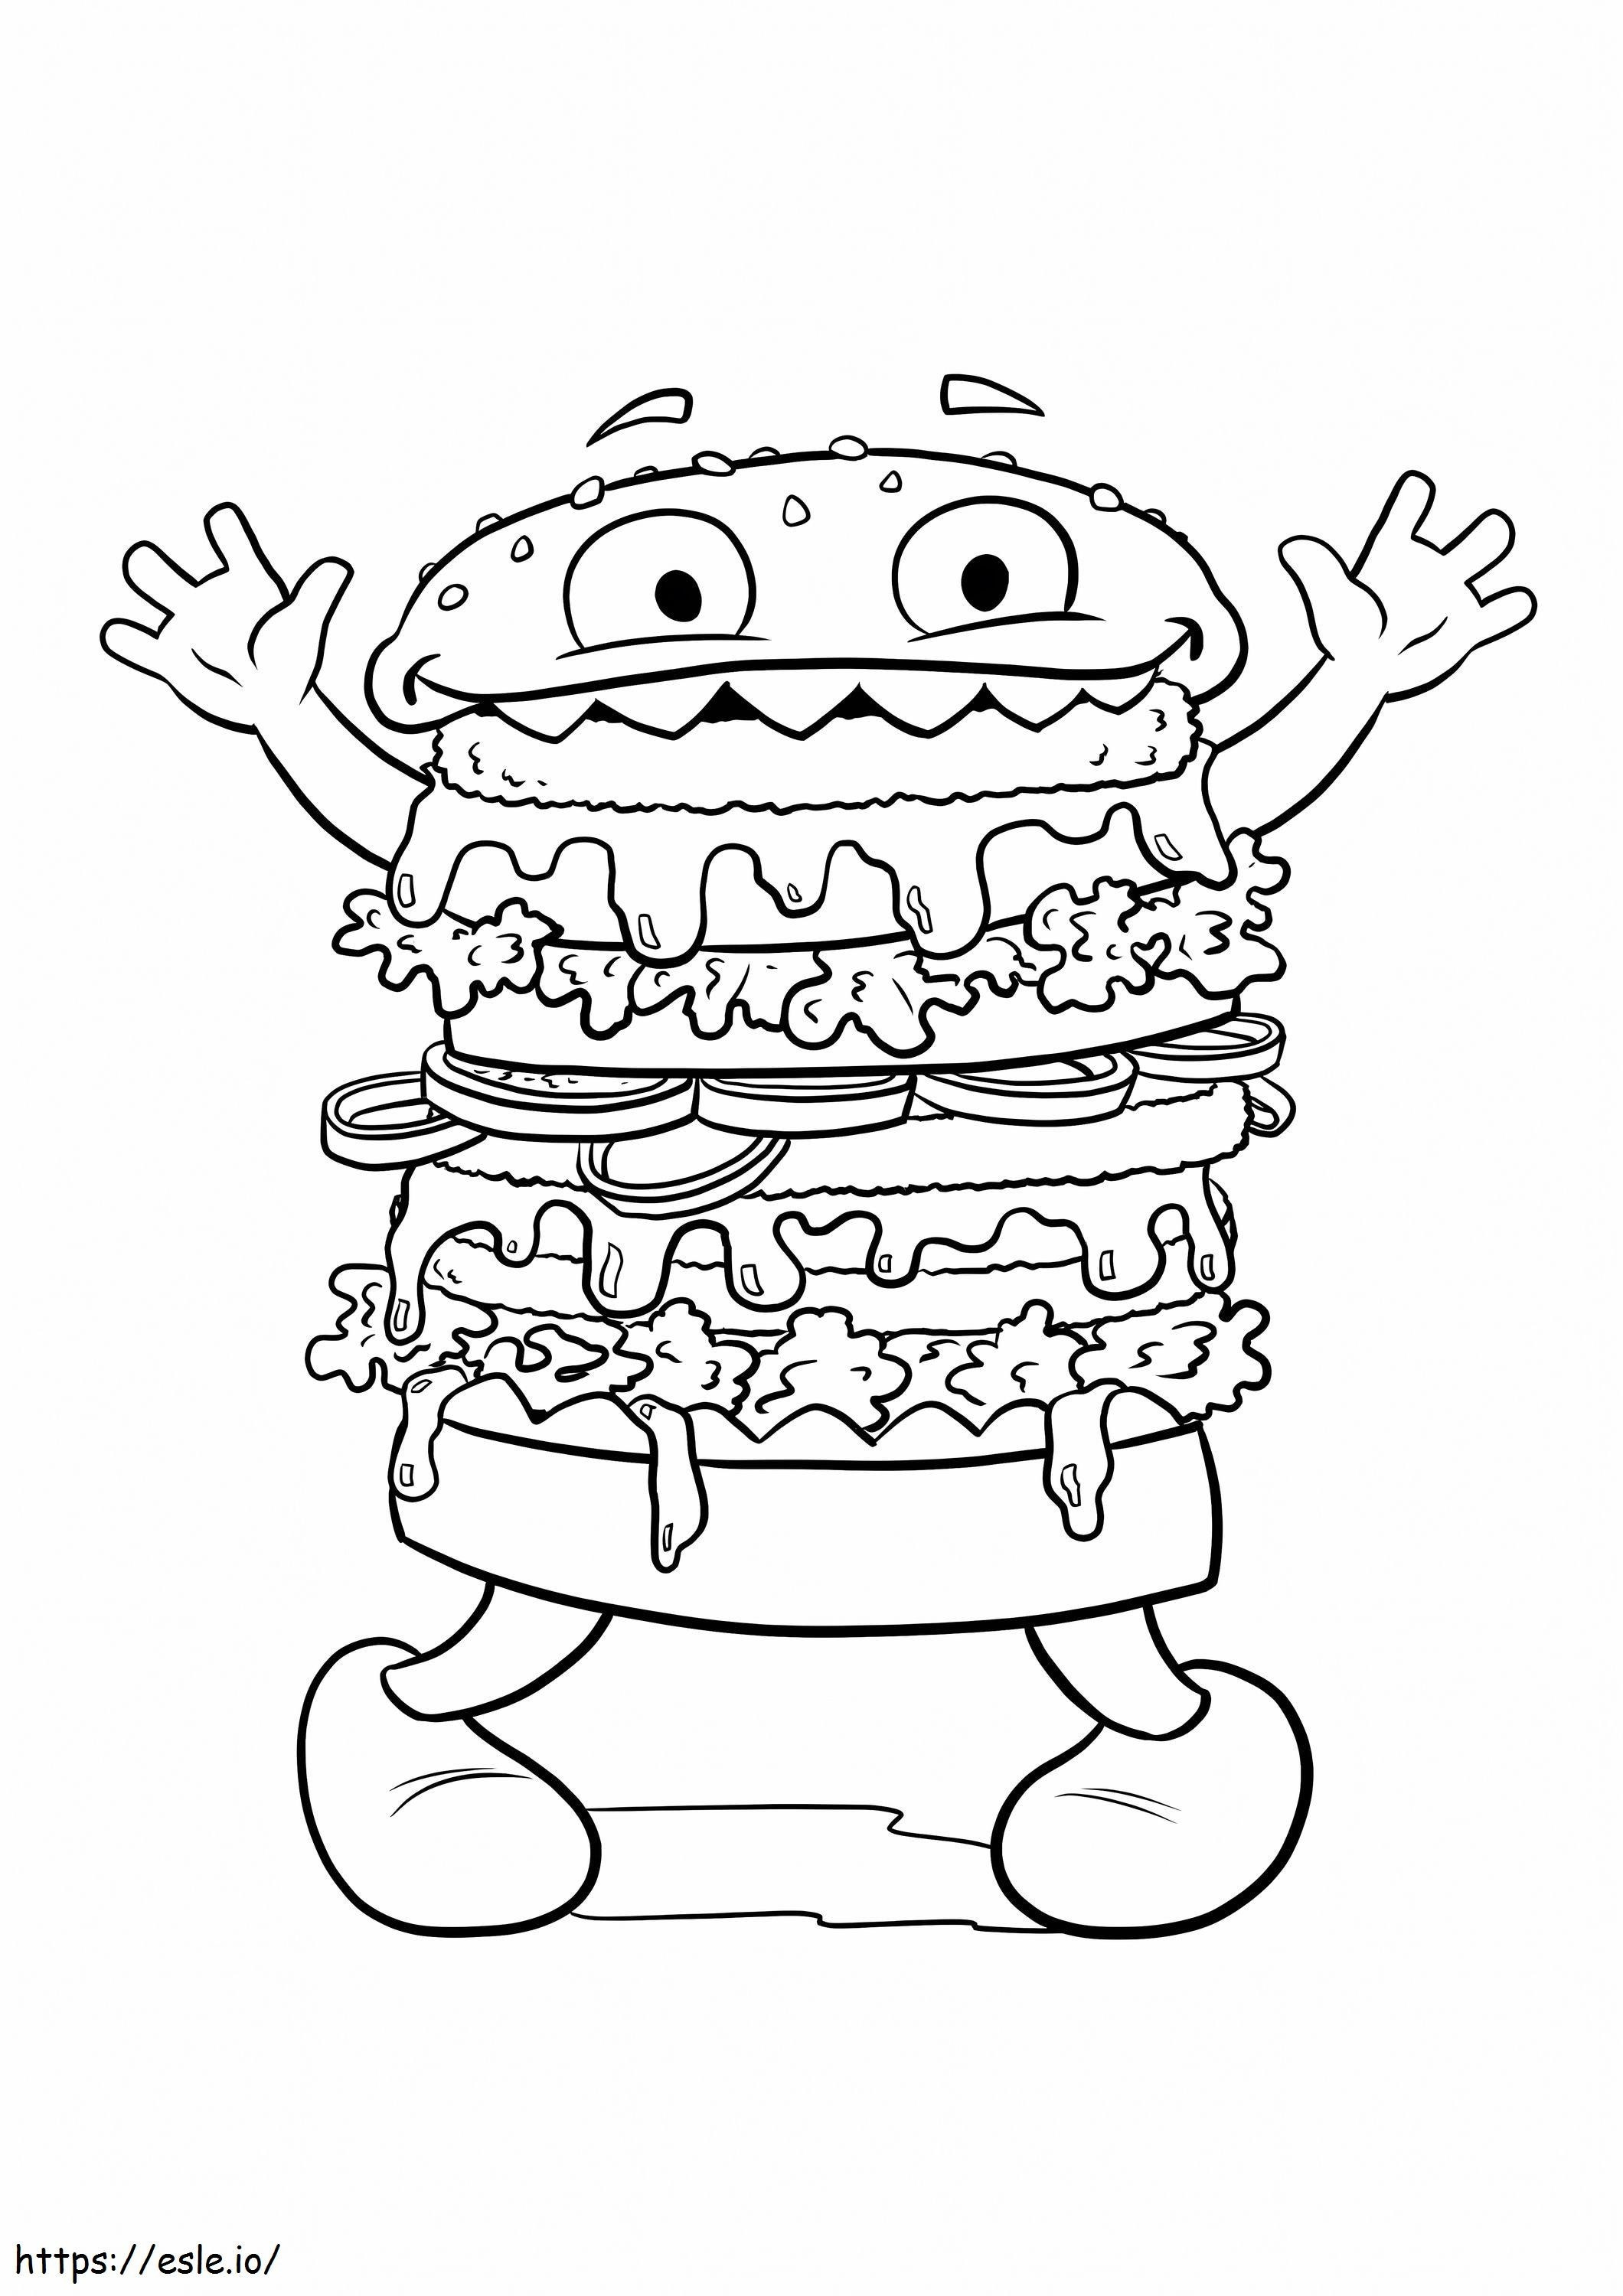 Silly Hamburger Monster coloring page